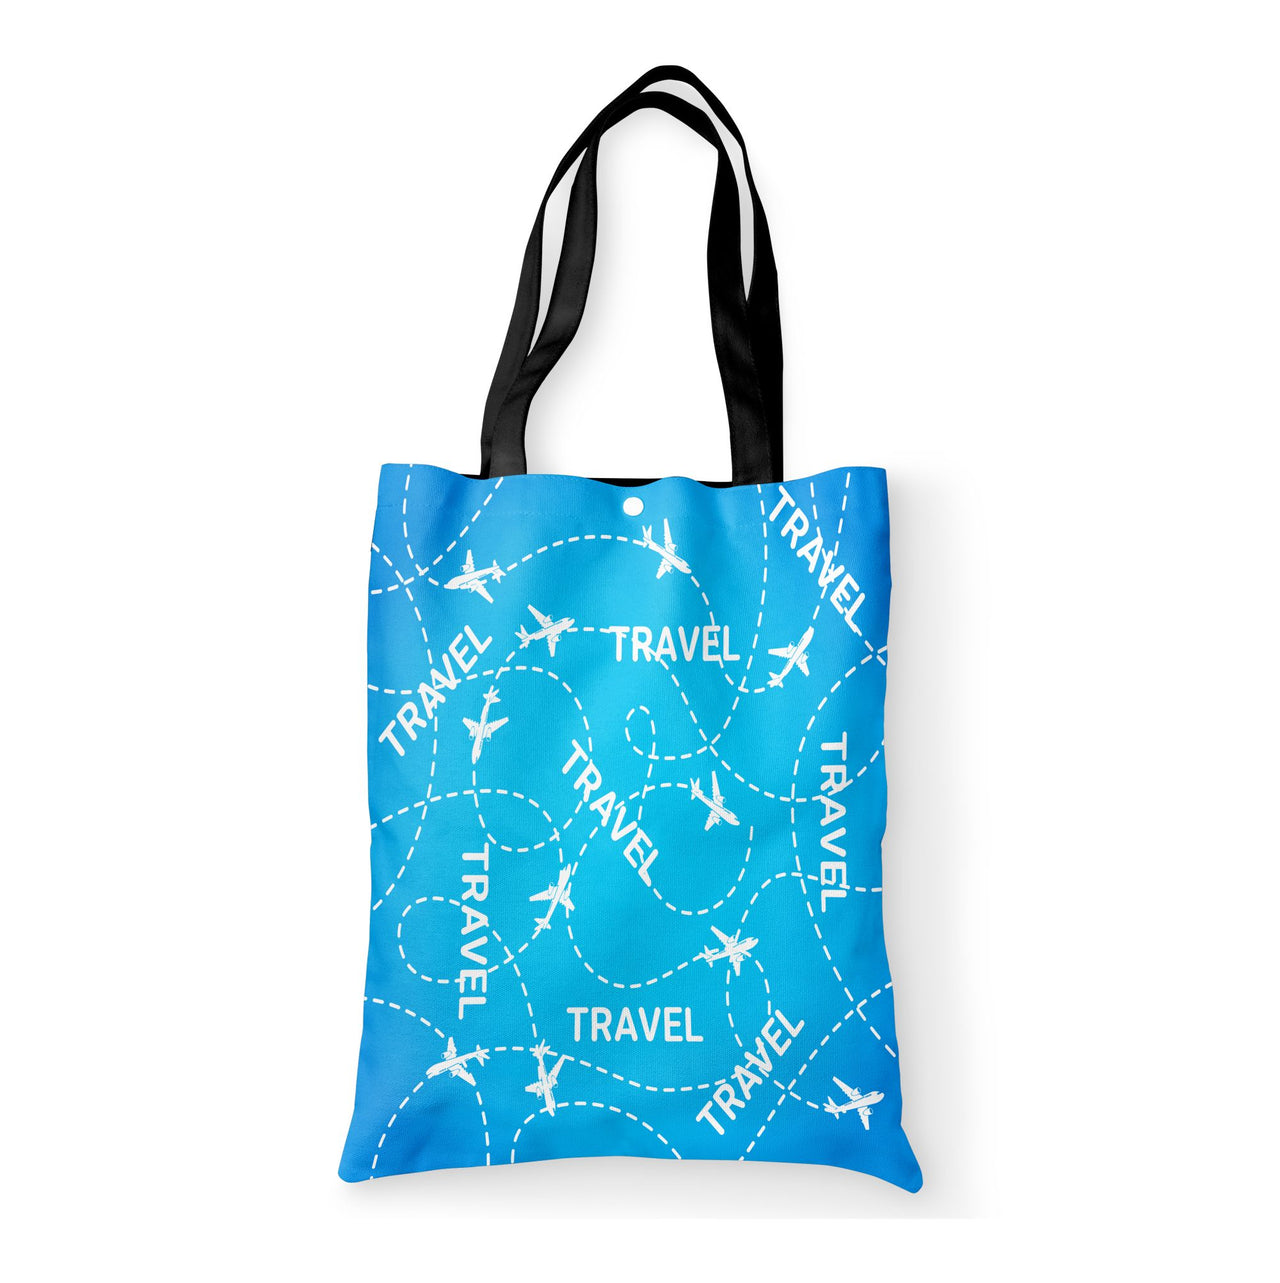 Travel & Planes Designed Tote Bags